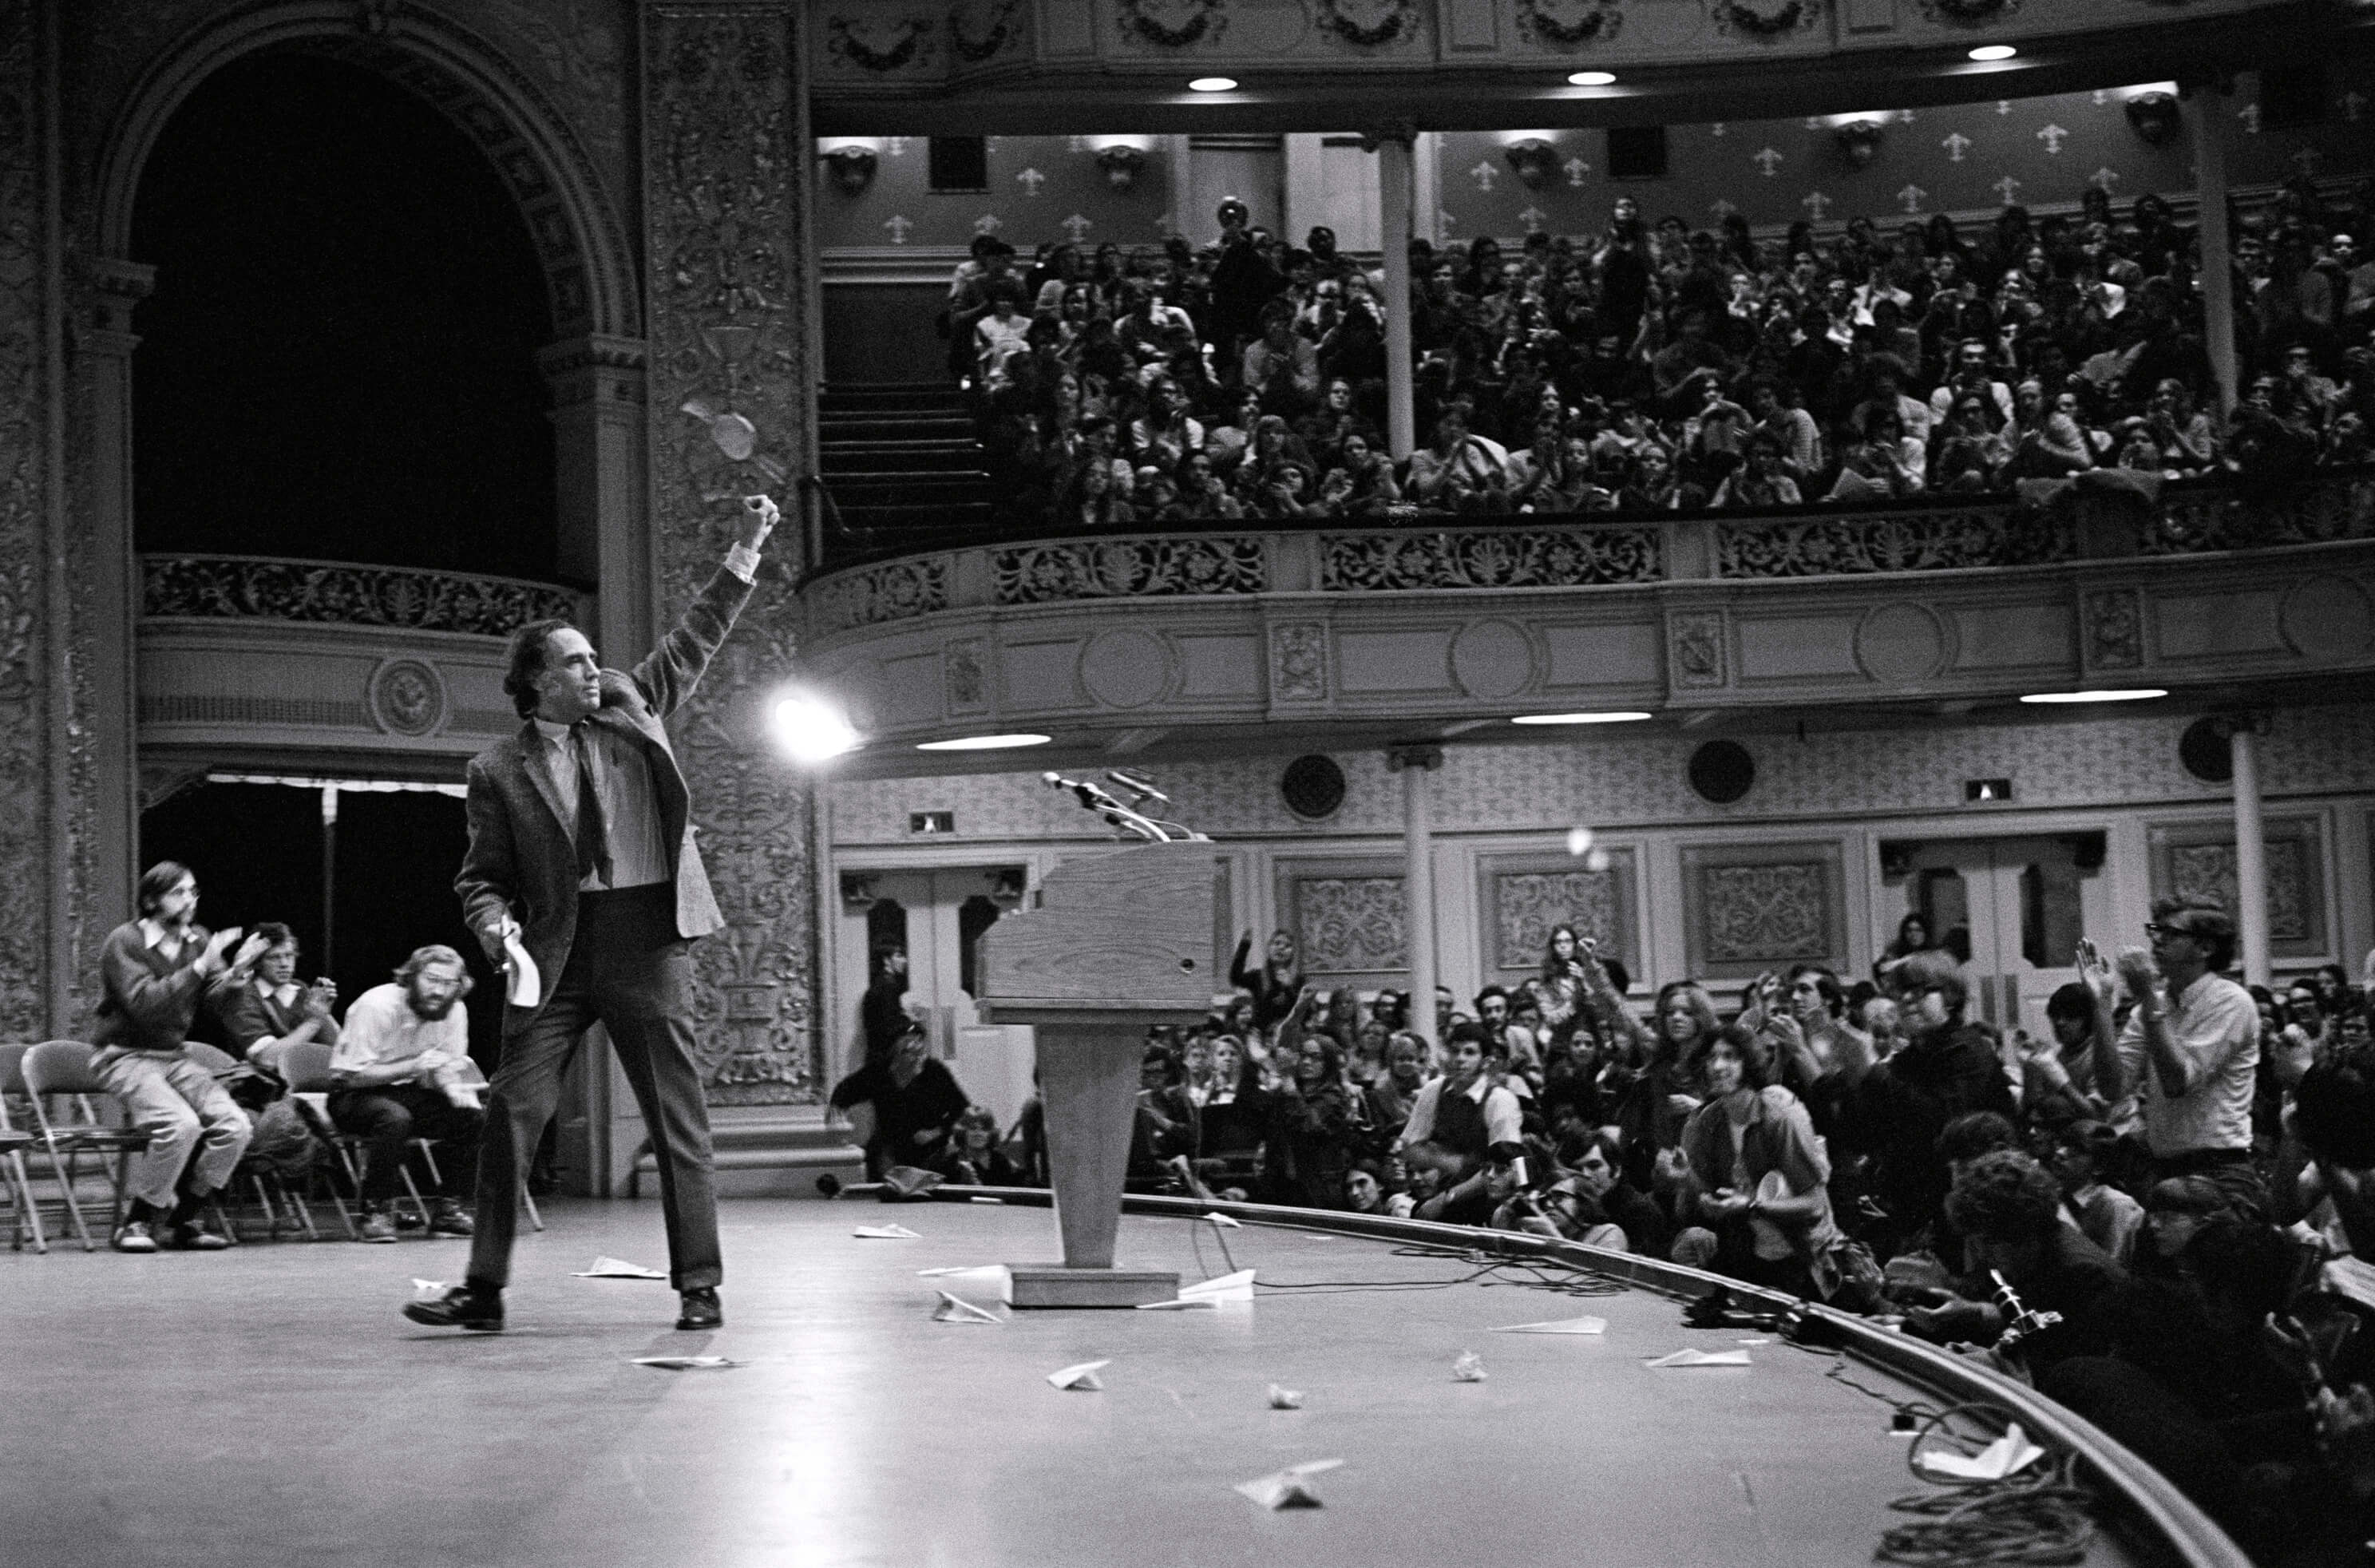 William Kunstler raises a fist to the sky on a stage in front of a podium. The crowd of people in the background also stands. Black and white photograph.